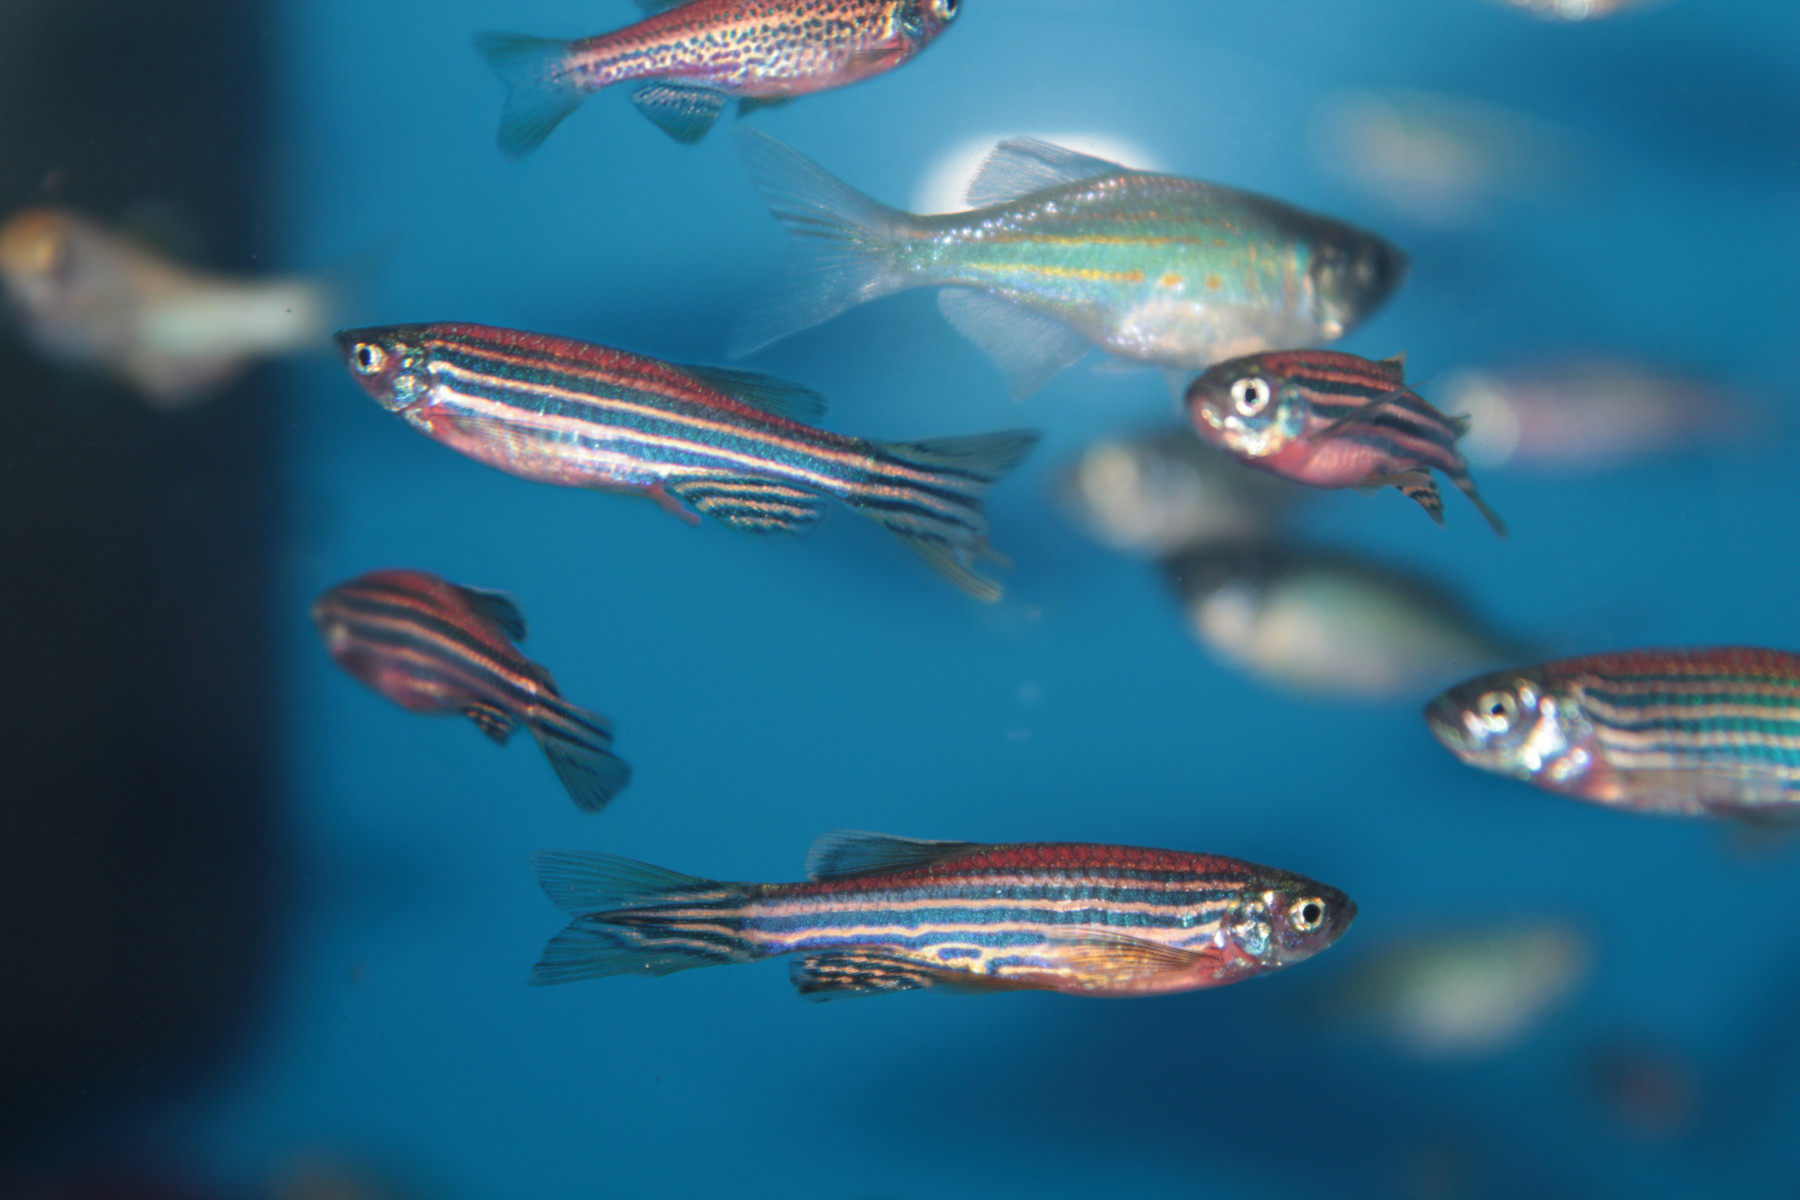 phage therapy treats antibiotic-resistant bacteria/Cystic Fibrosis News Today/zebrafish image